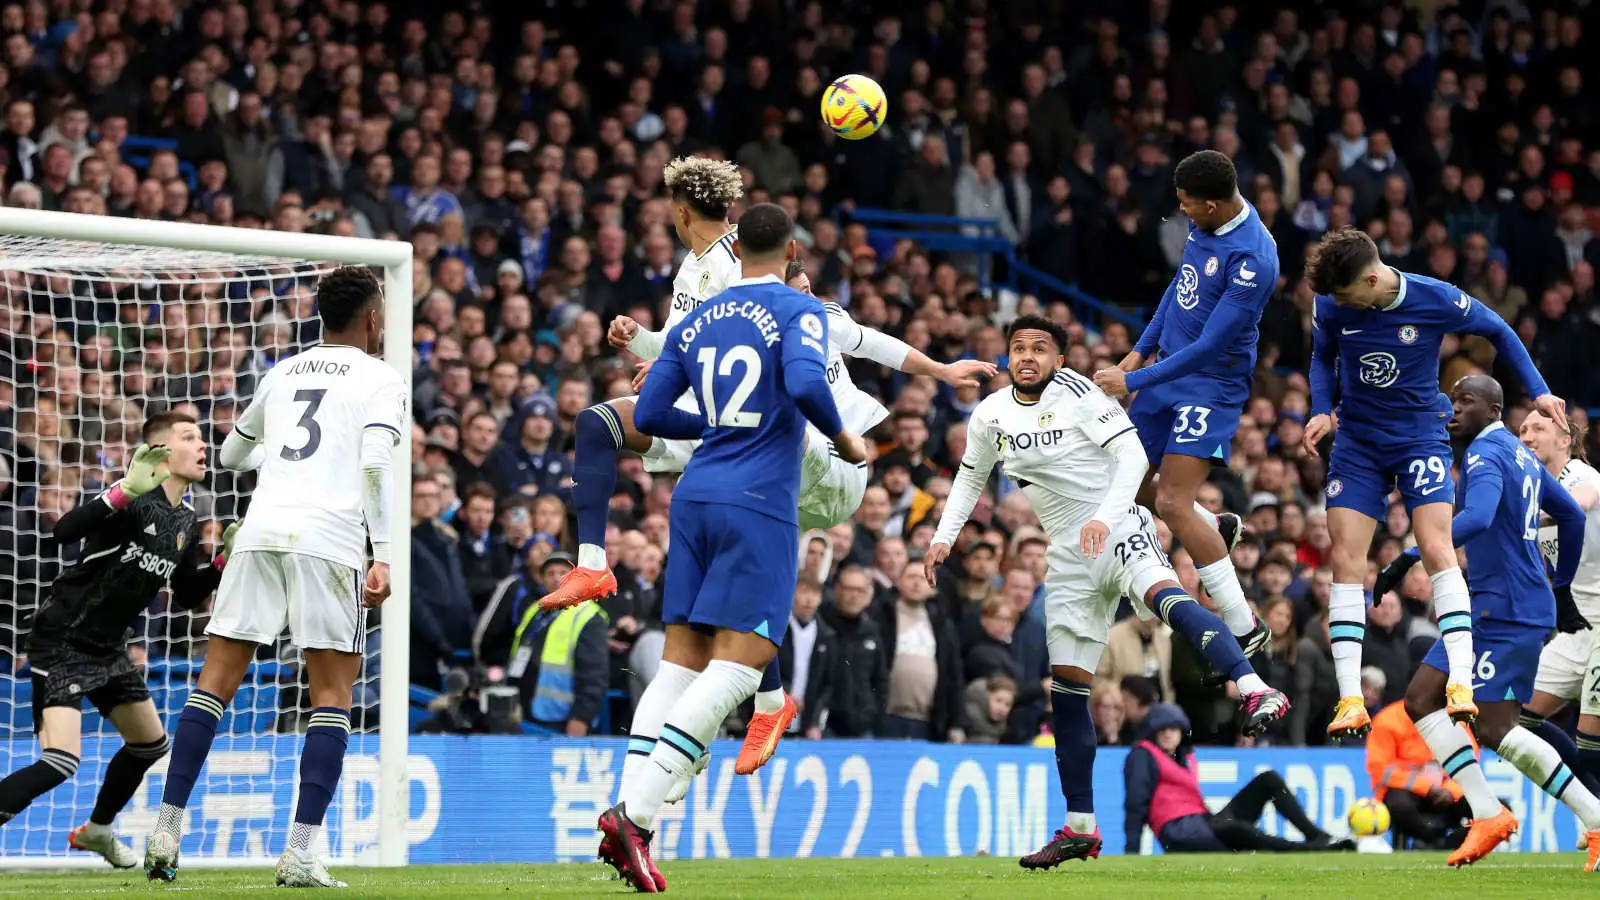 Wesley Fofana gives Chelsea the lead against Leeds United in the Premier League